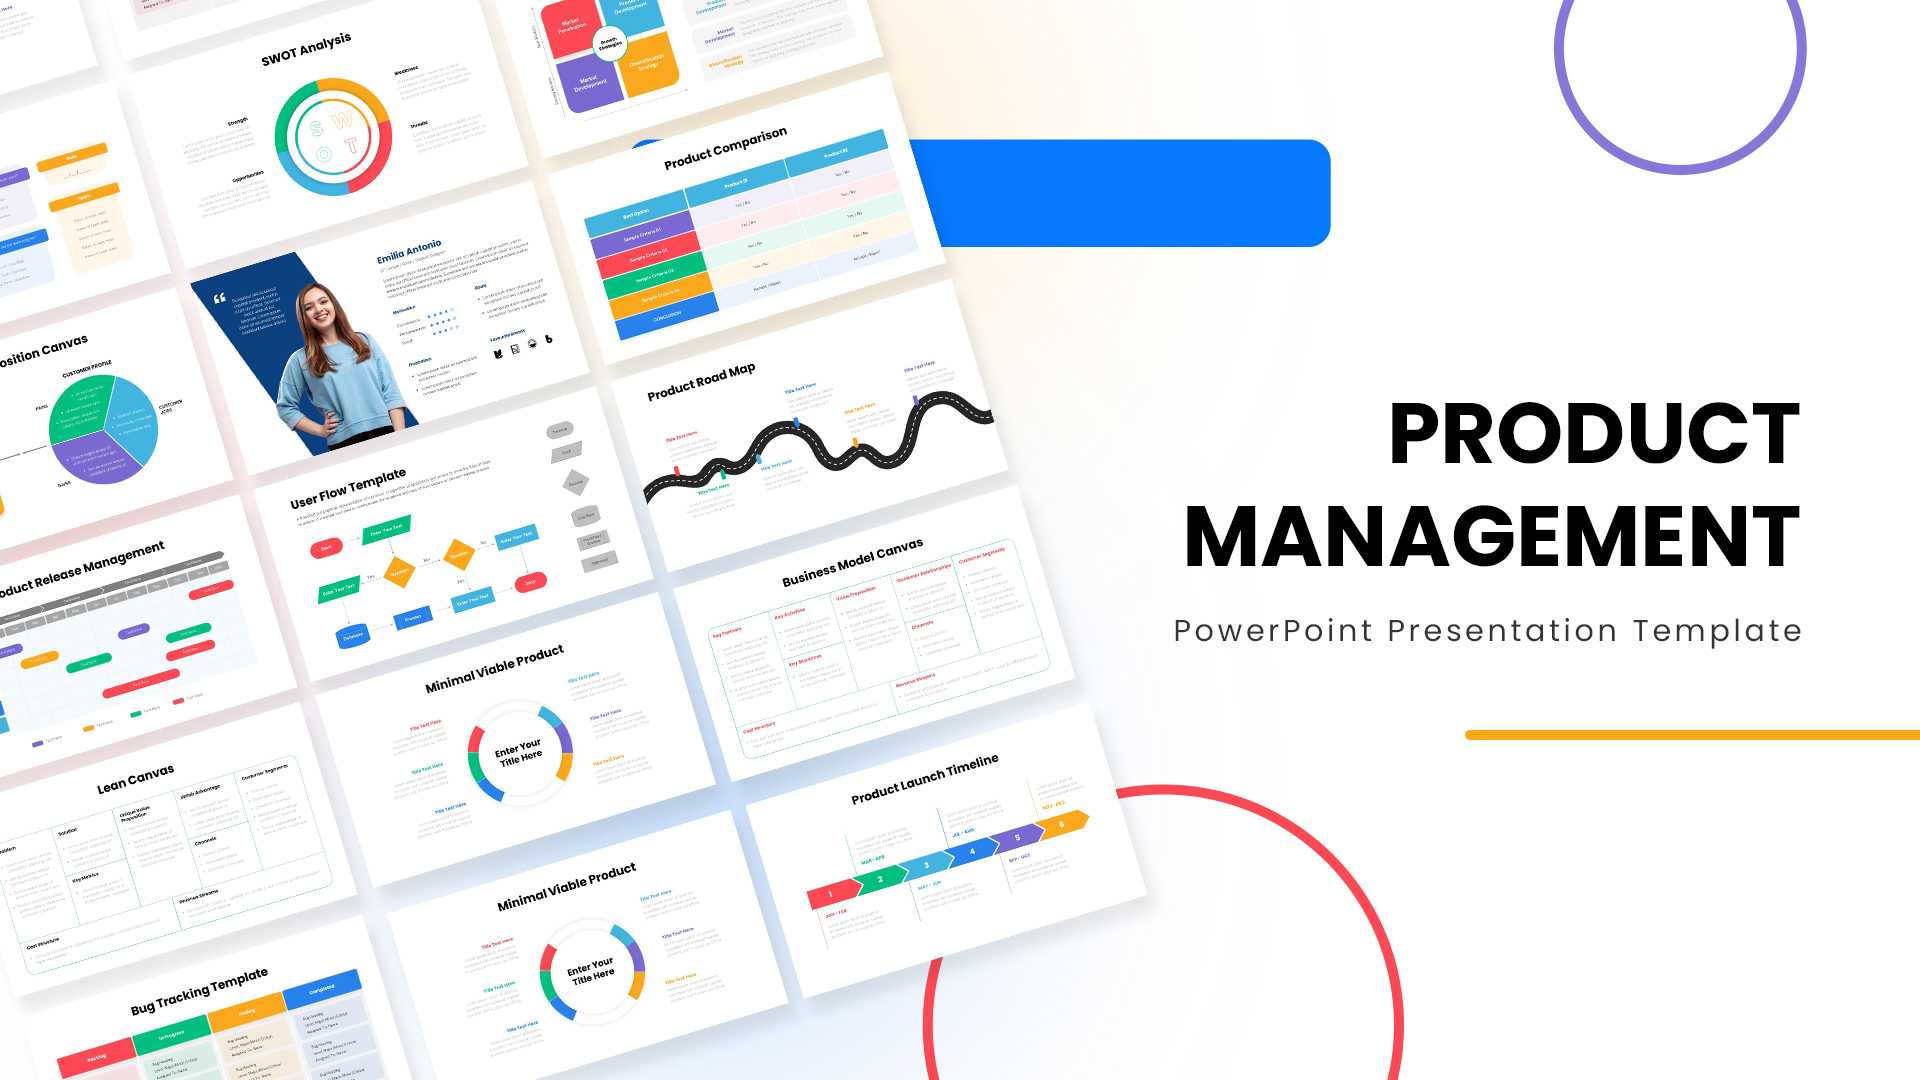 Product Management PowerPoint Presentation Template